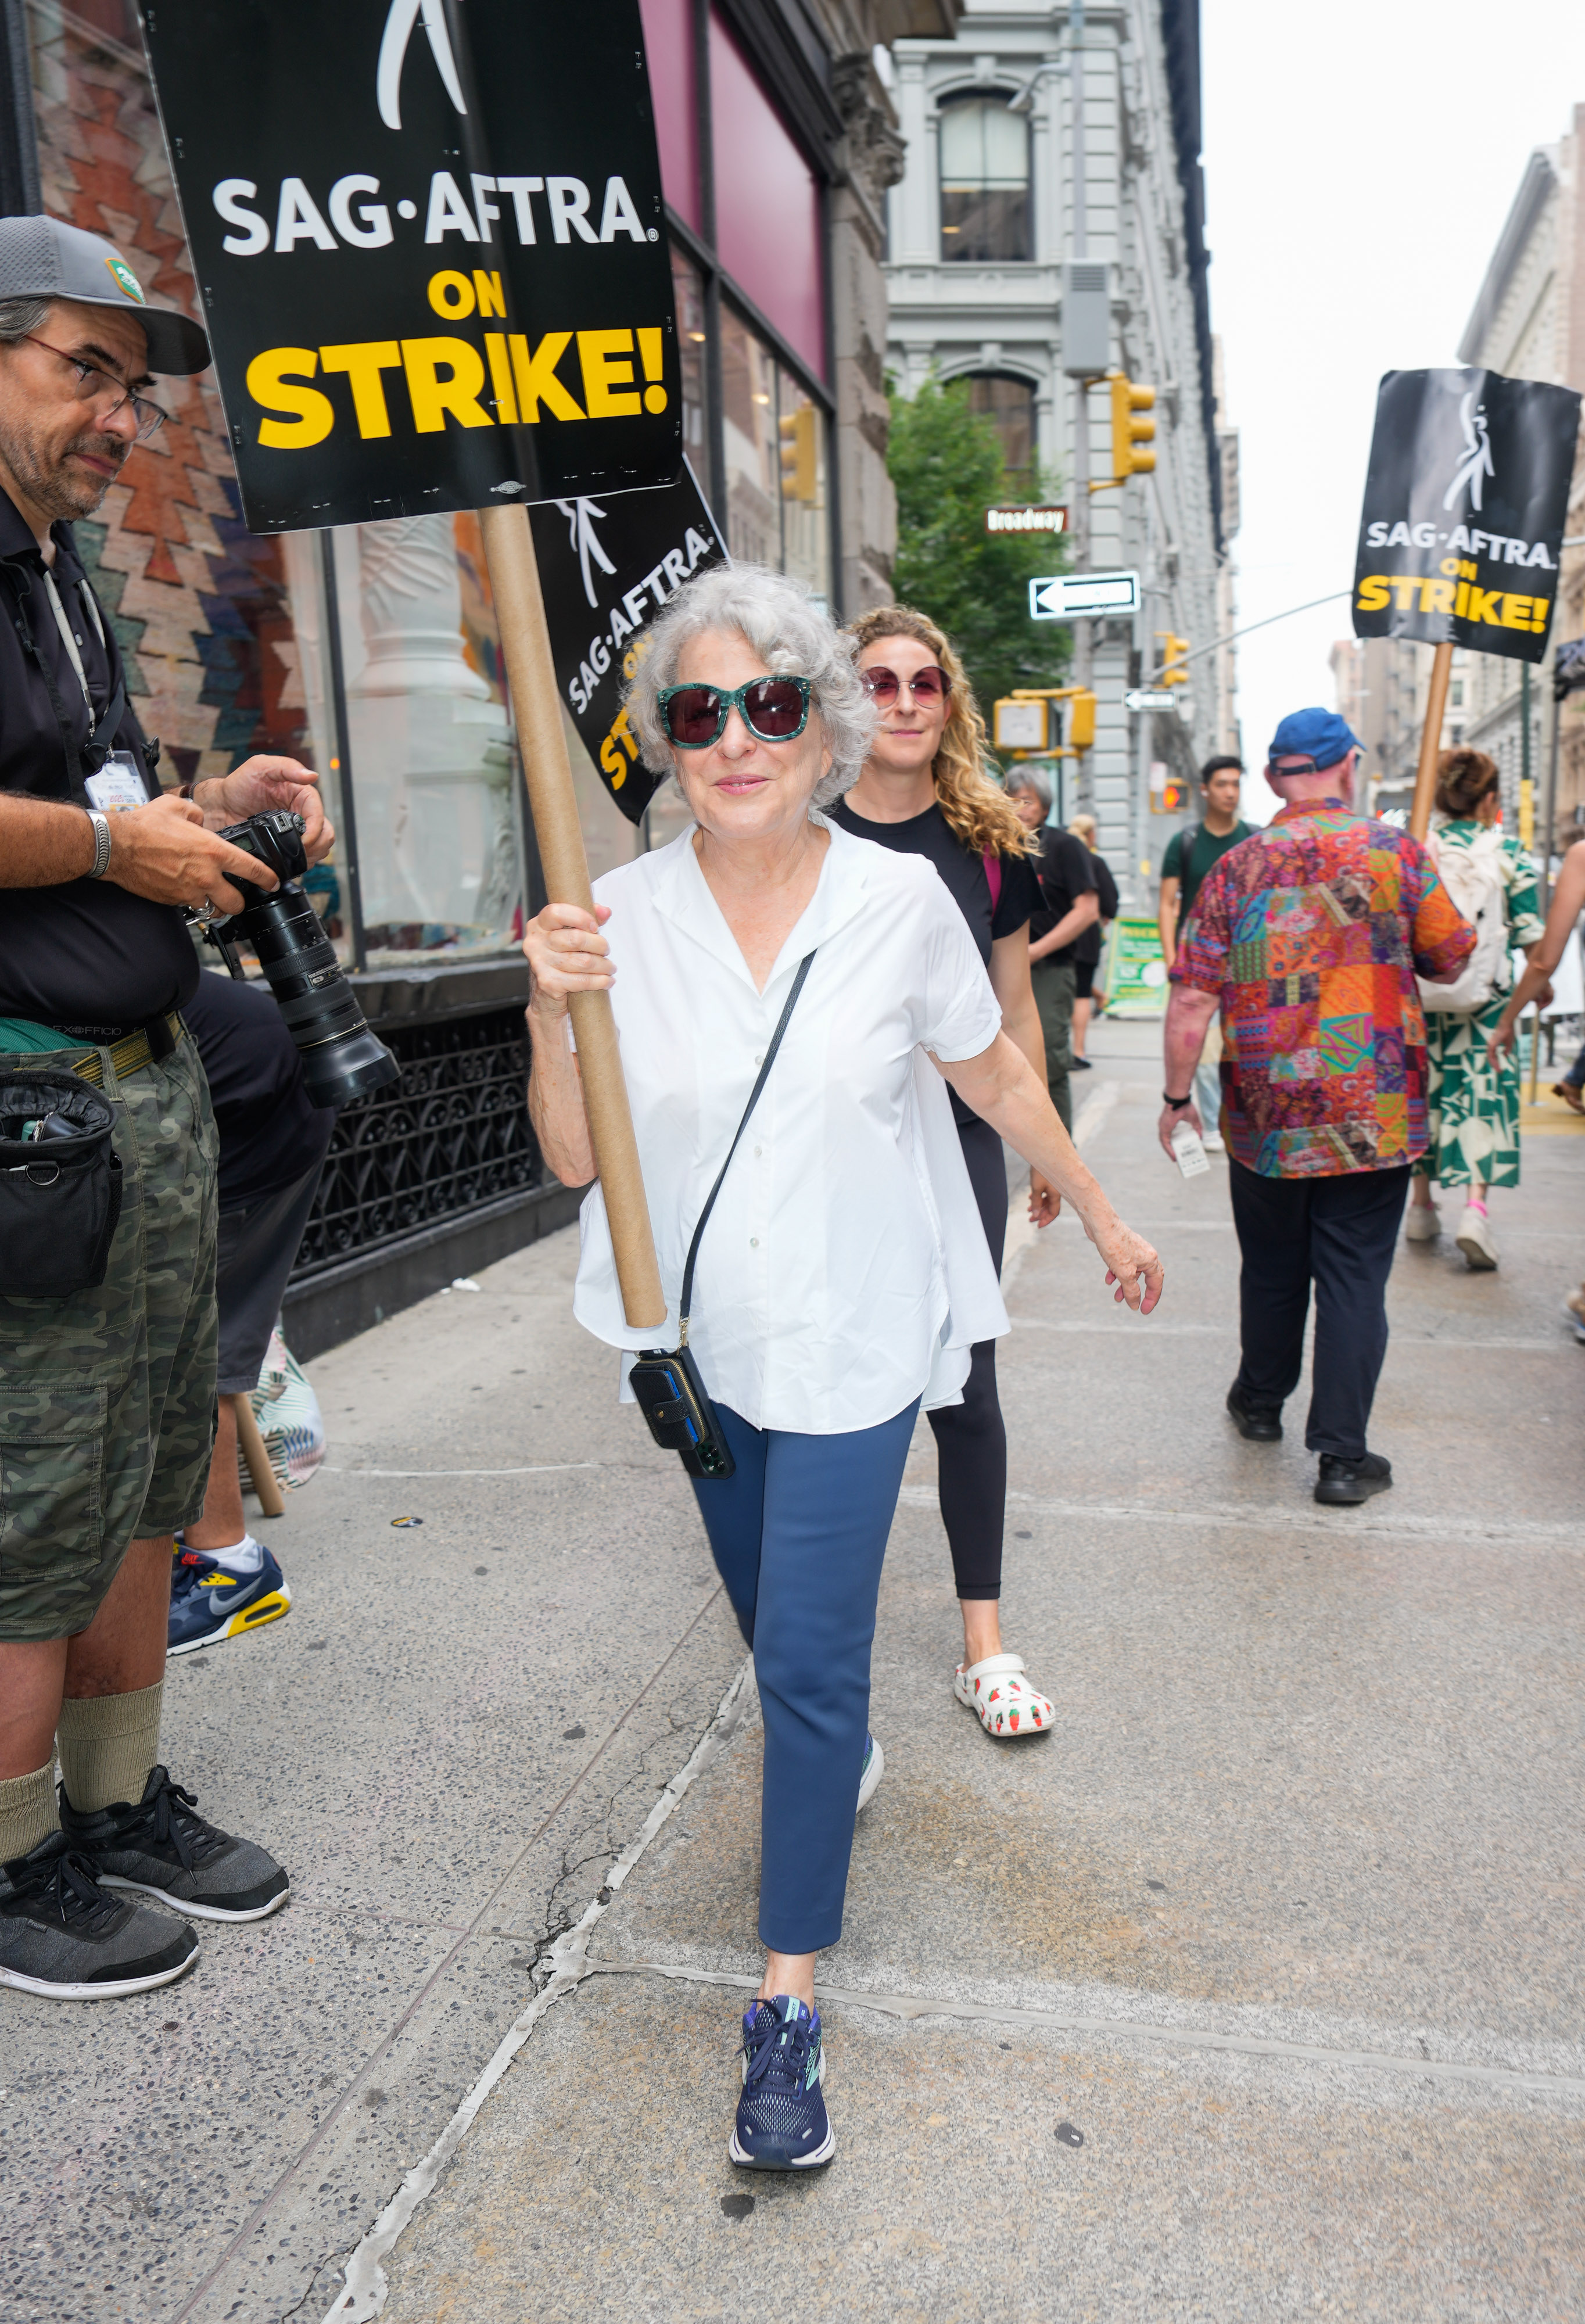 Bette Midler with her daughter Sophie von Haselberg behind marching the streets in support of the SAG-AFTRA strike in New York City, 2023 | Source: Getty Images